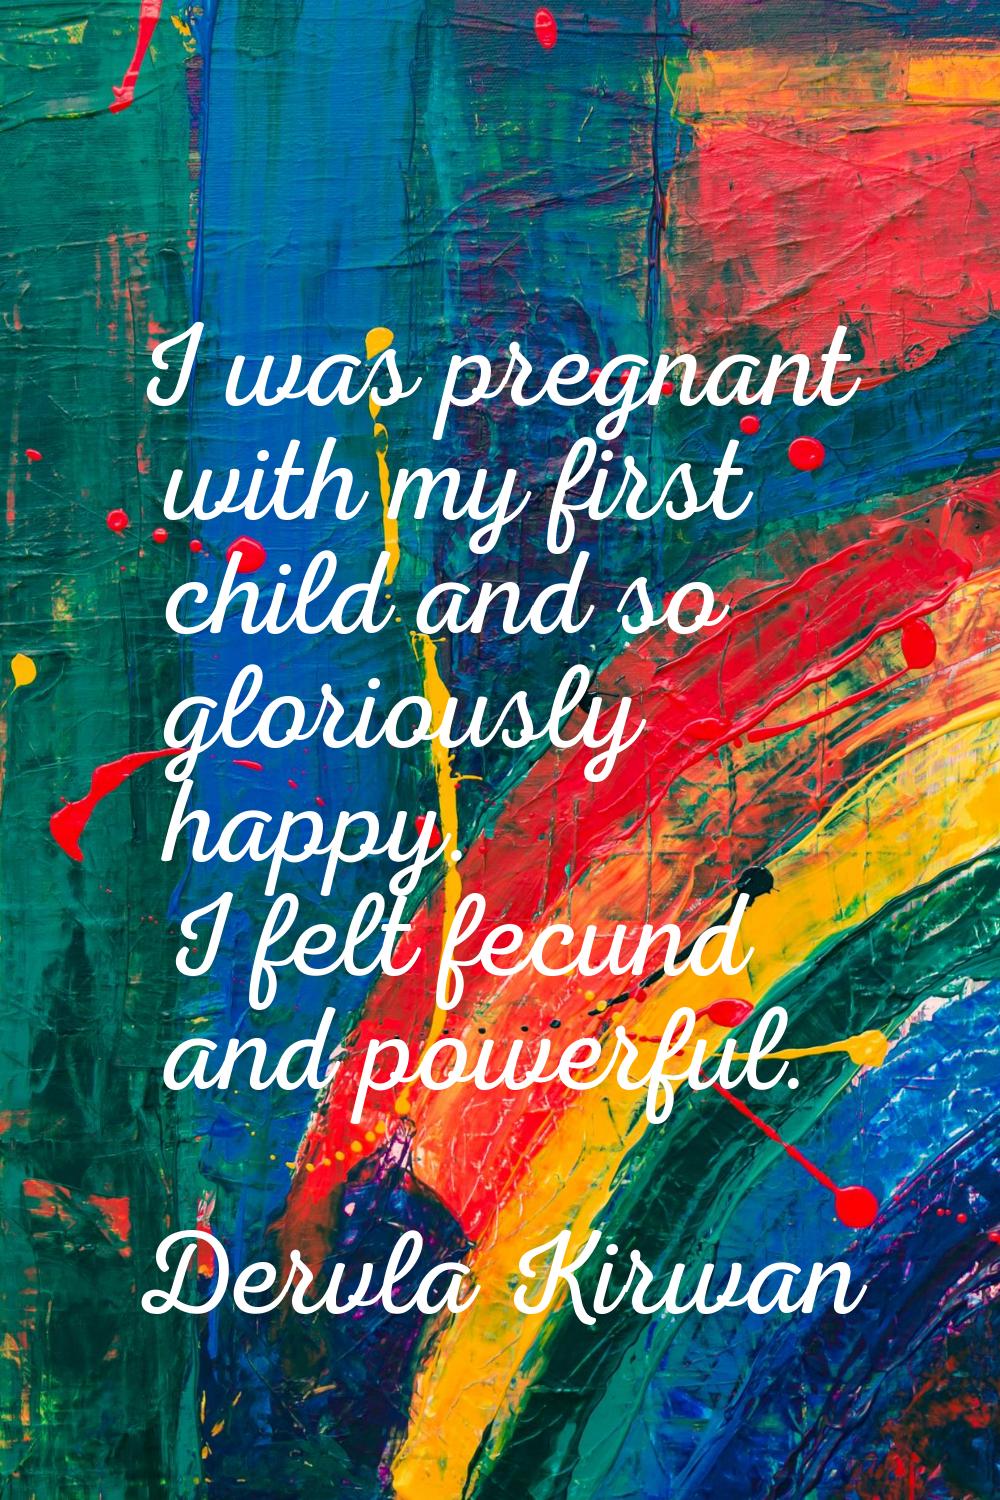 I was pregnant with my first child and so gloriously happy. I felt fecund and powerful.